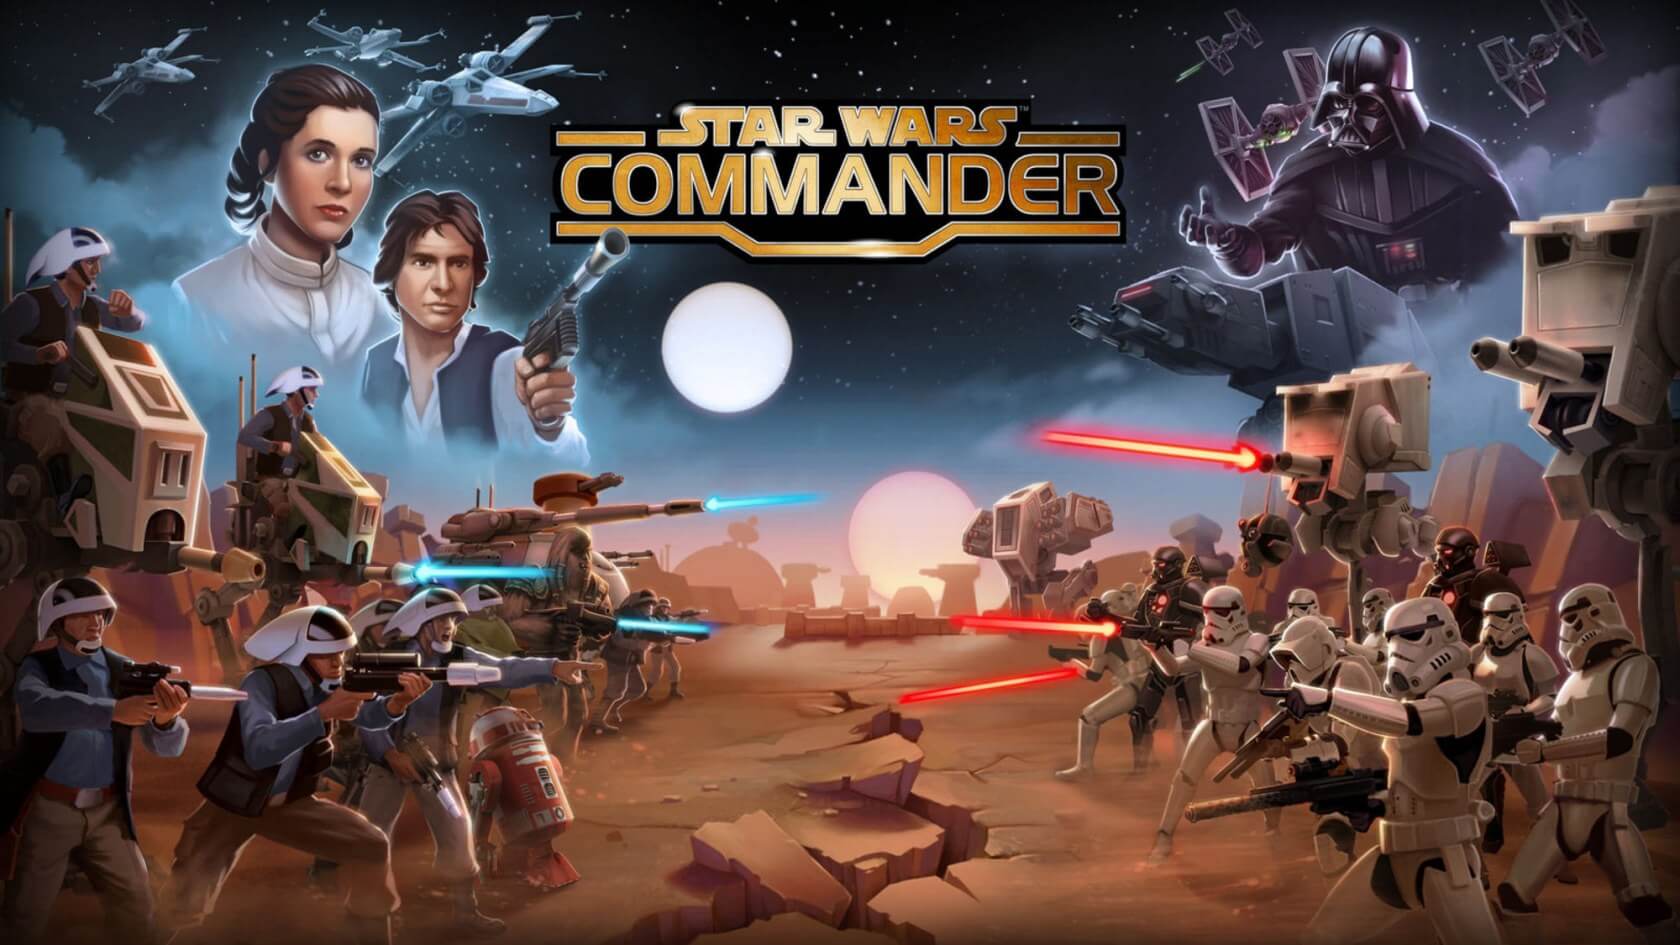 Disney pens deal with Zynga to bring two Star Wars games to mobile